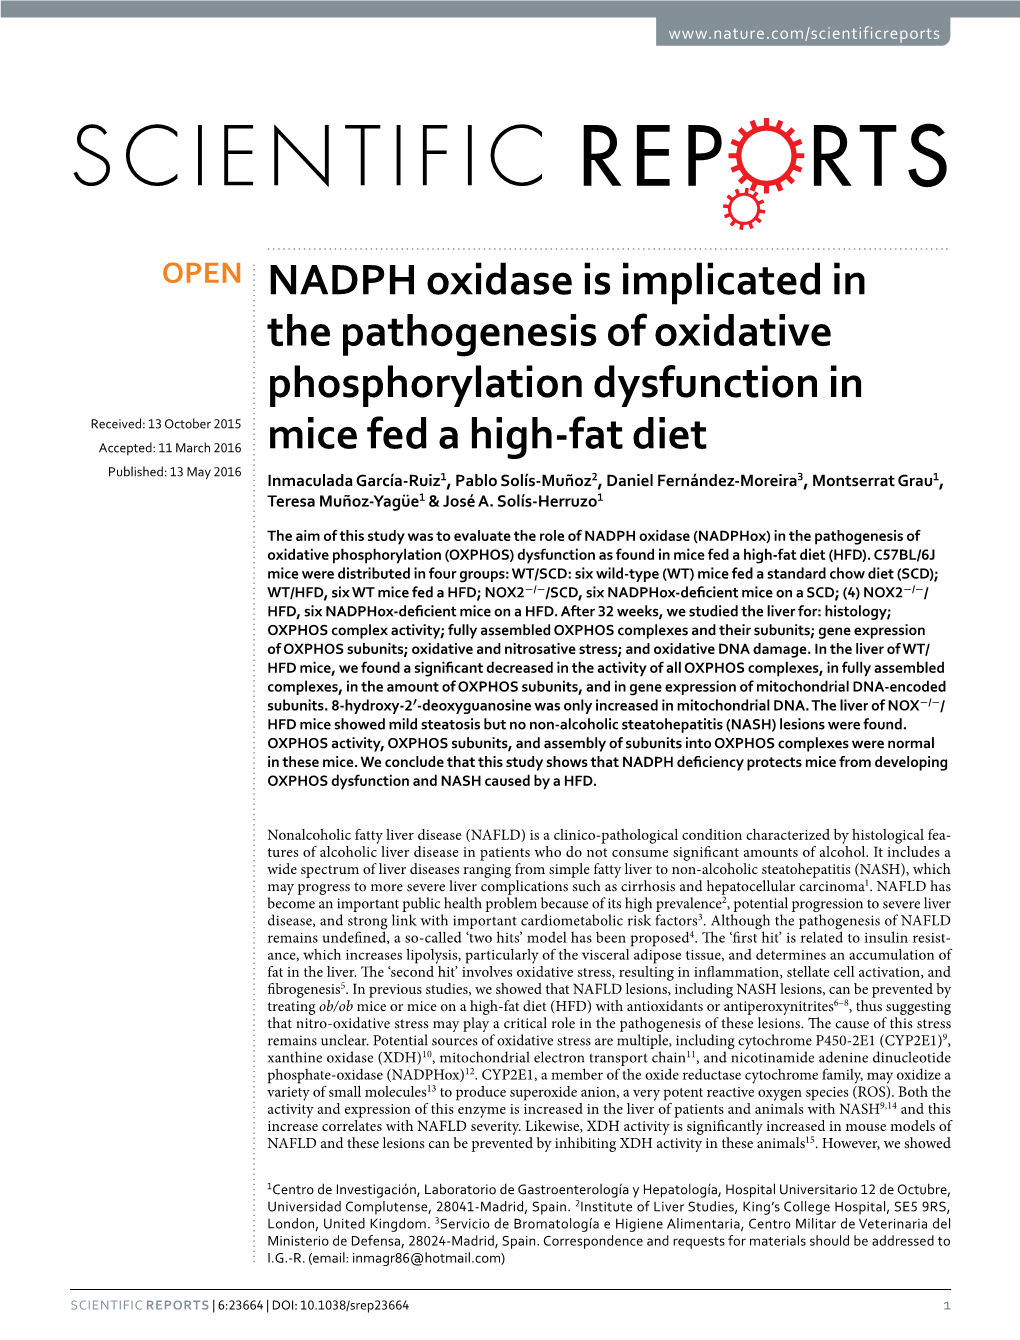 NADPH Oxidase Is Implicated in the Pathogenesis of Oxidative